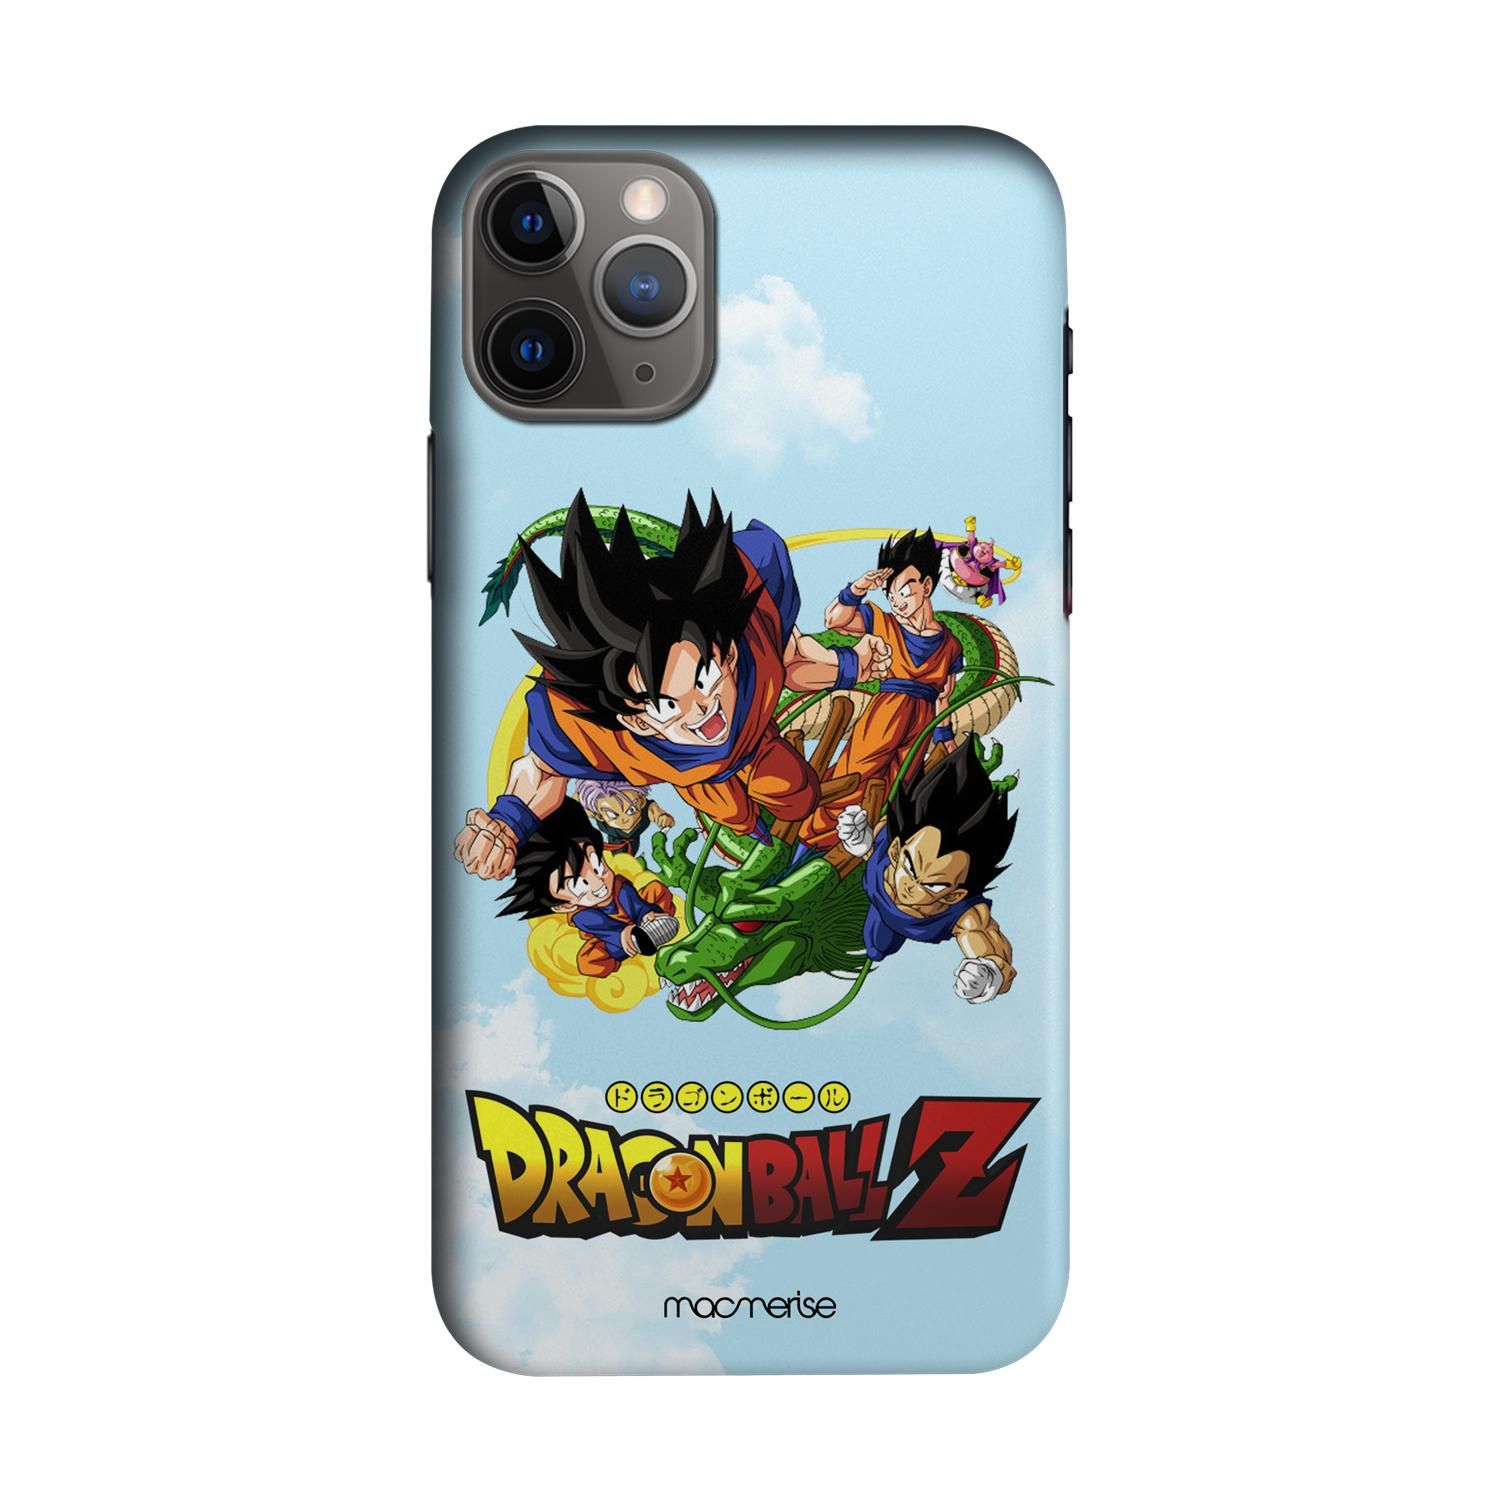 Buy Dragon ball Z - Sleek Phone Case for iPhone 11 Pro Max Online